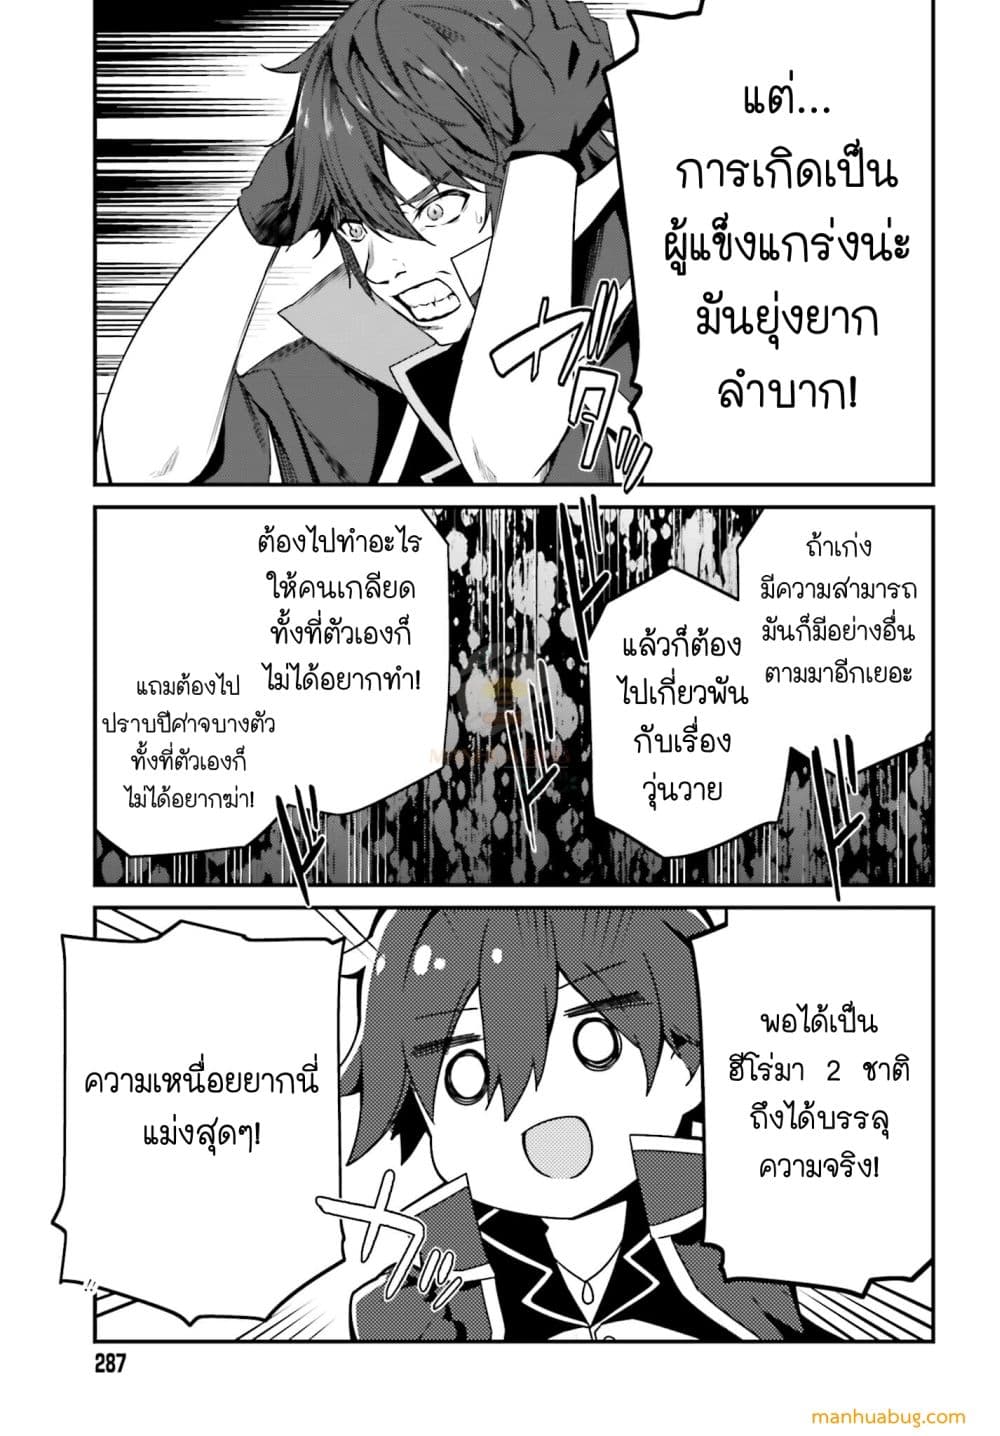 THE INCOMPETENT PRINCE WHO HAS BEEN BANISHED WANTS TO HIDE HIS ABILITIES~ ตอนที่ 1 (20)